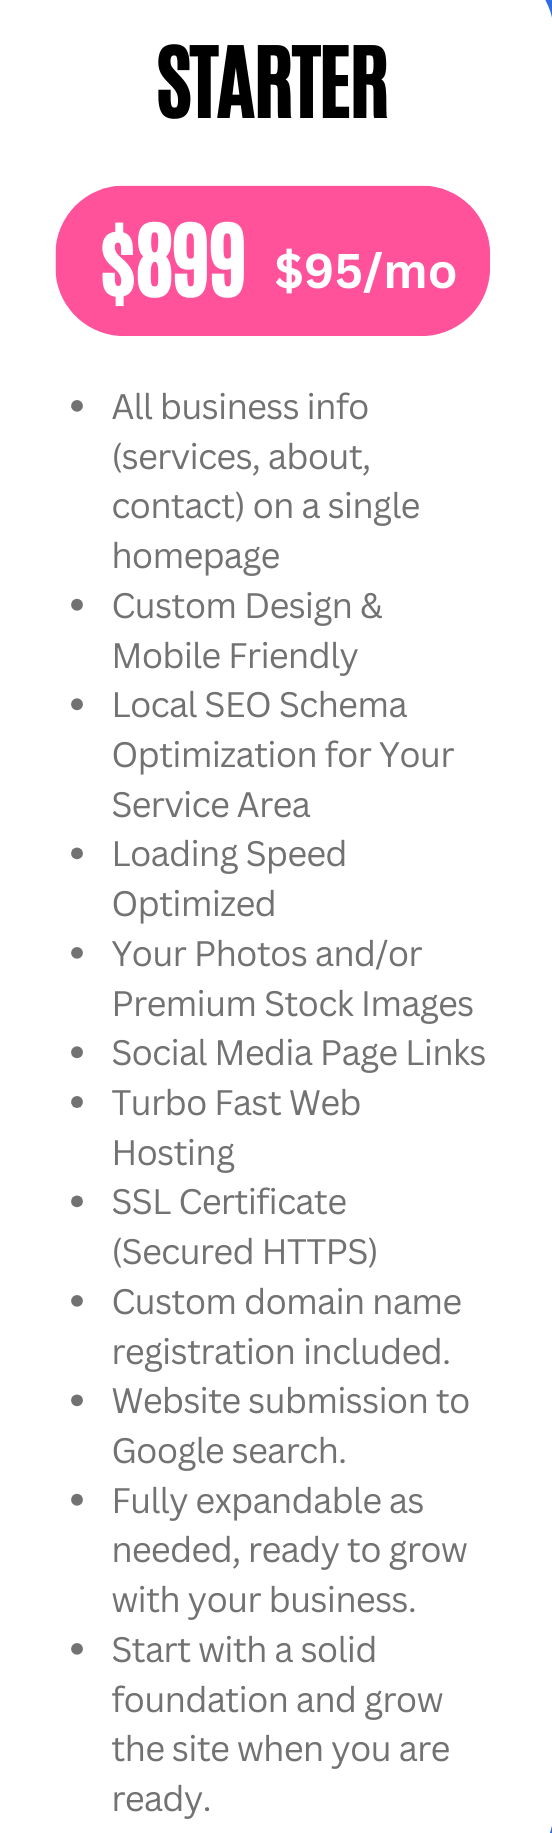 a screenshot of a website package plan that says starter for $ 899